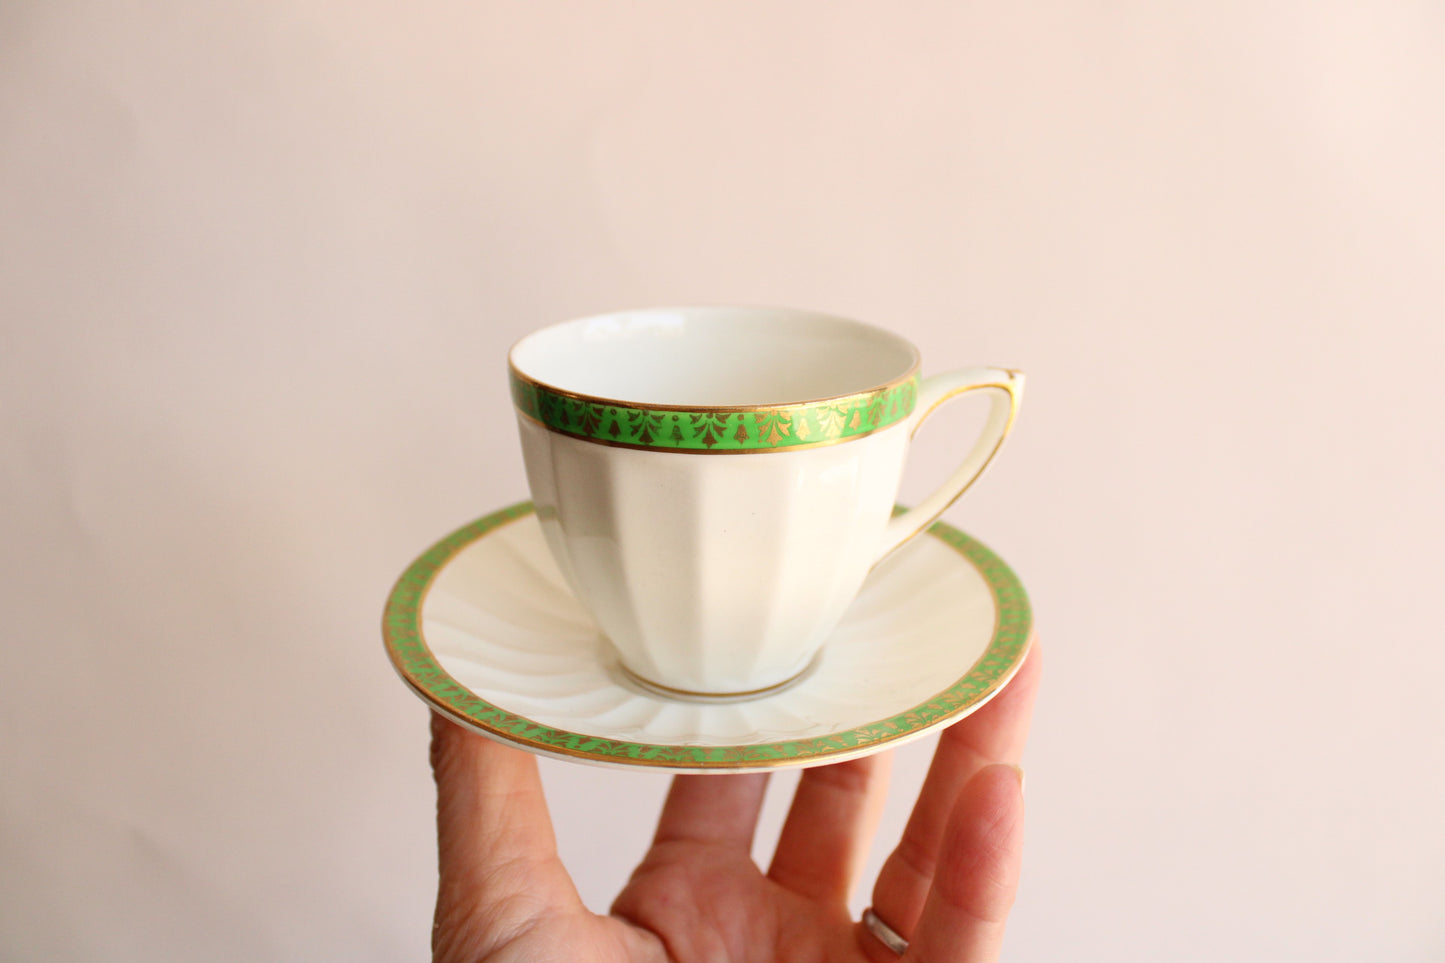 Vintage 1960s Crown Ducal Demitasse Cup and Saucer